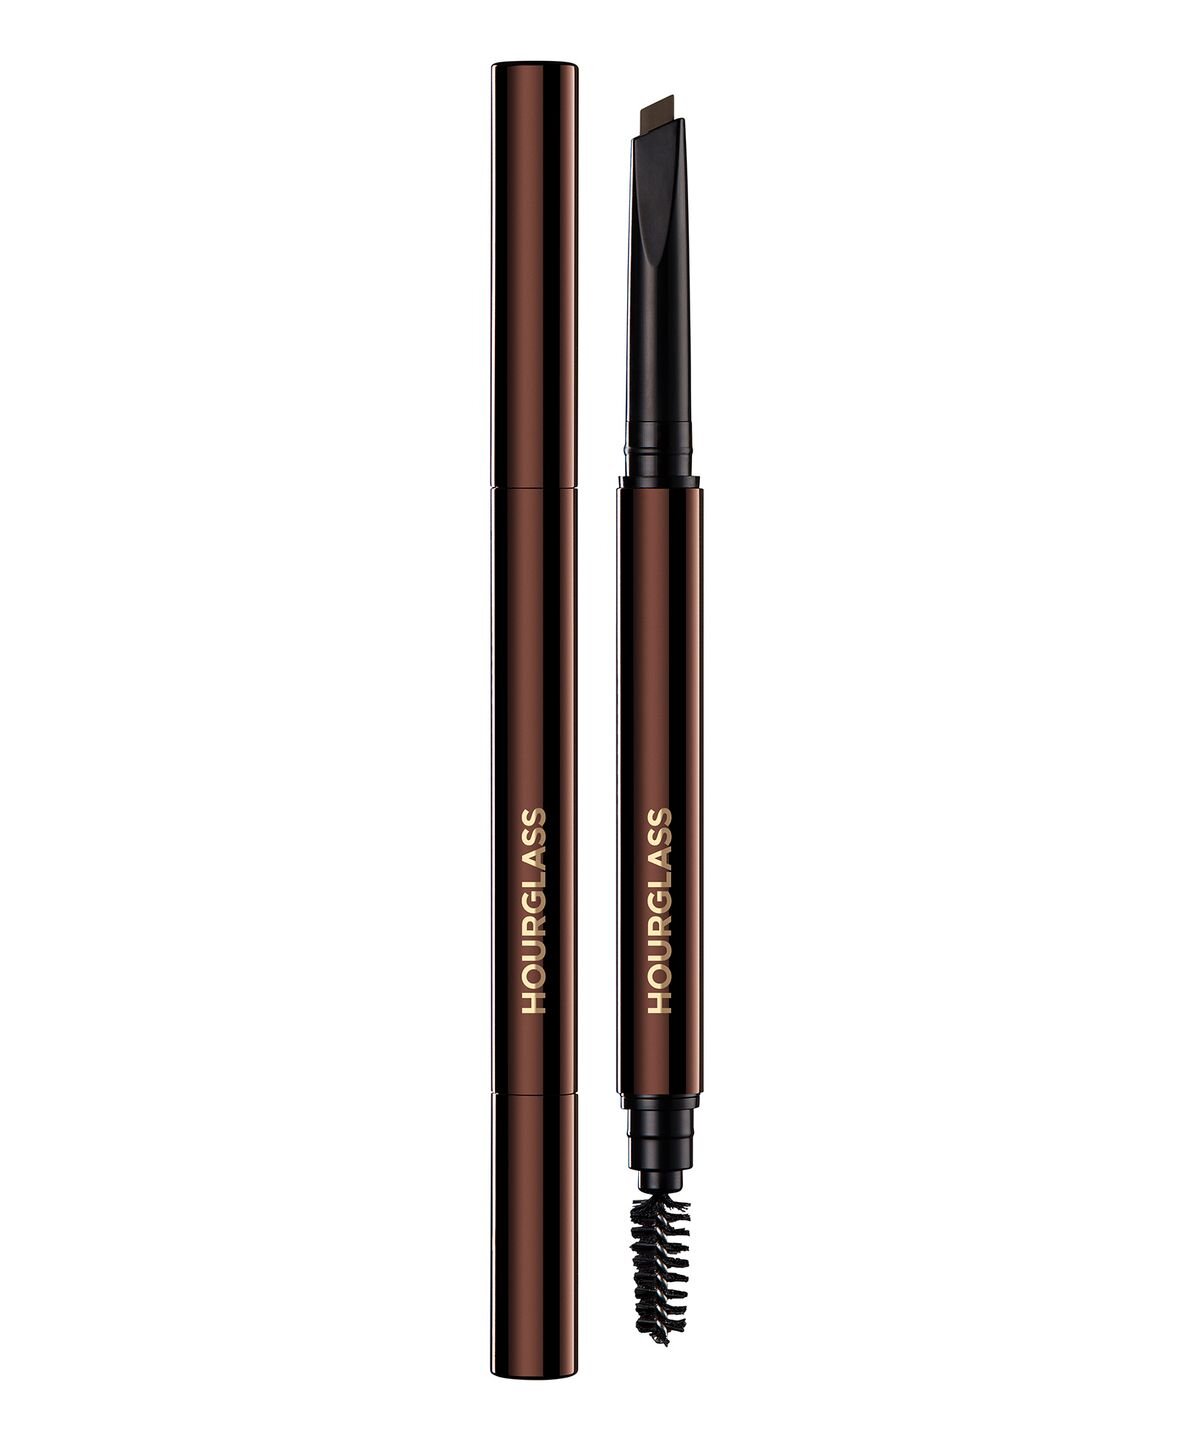 Hourglass Arch Brow Sculpting Pencil, £33